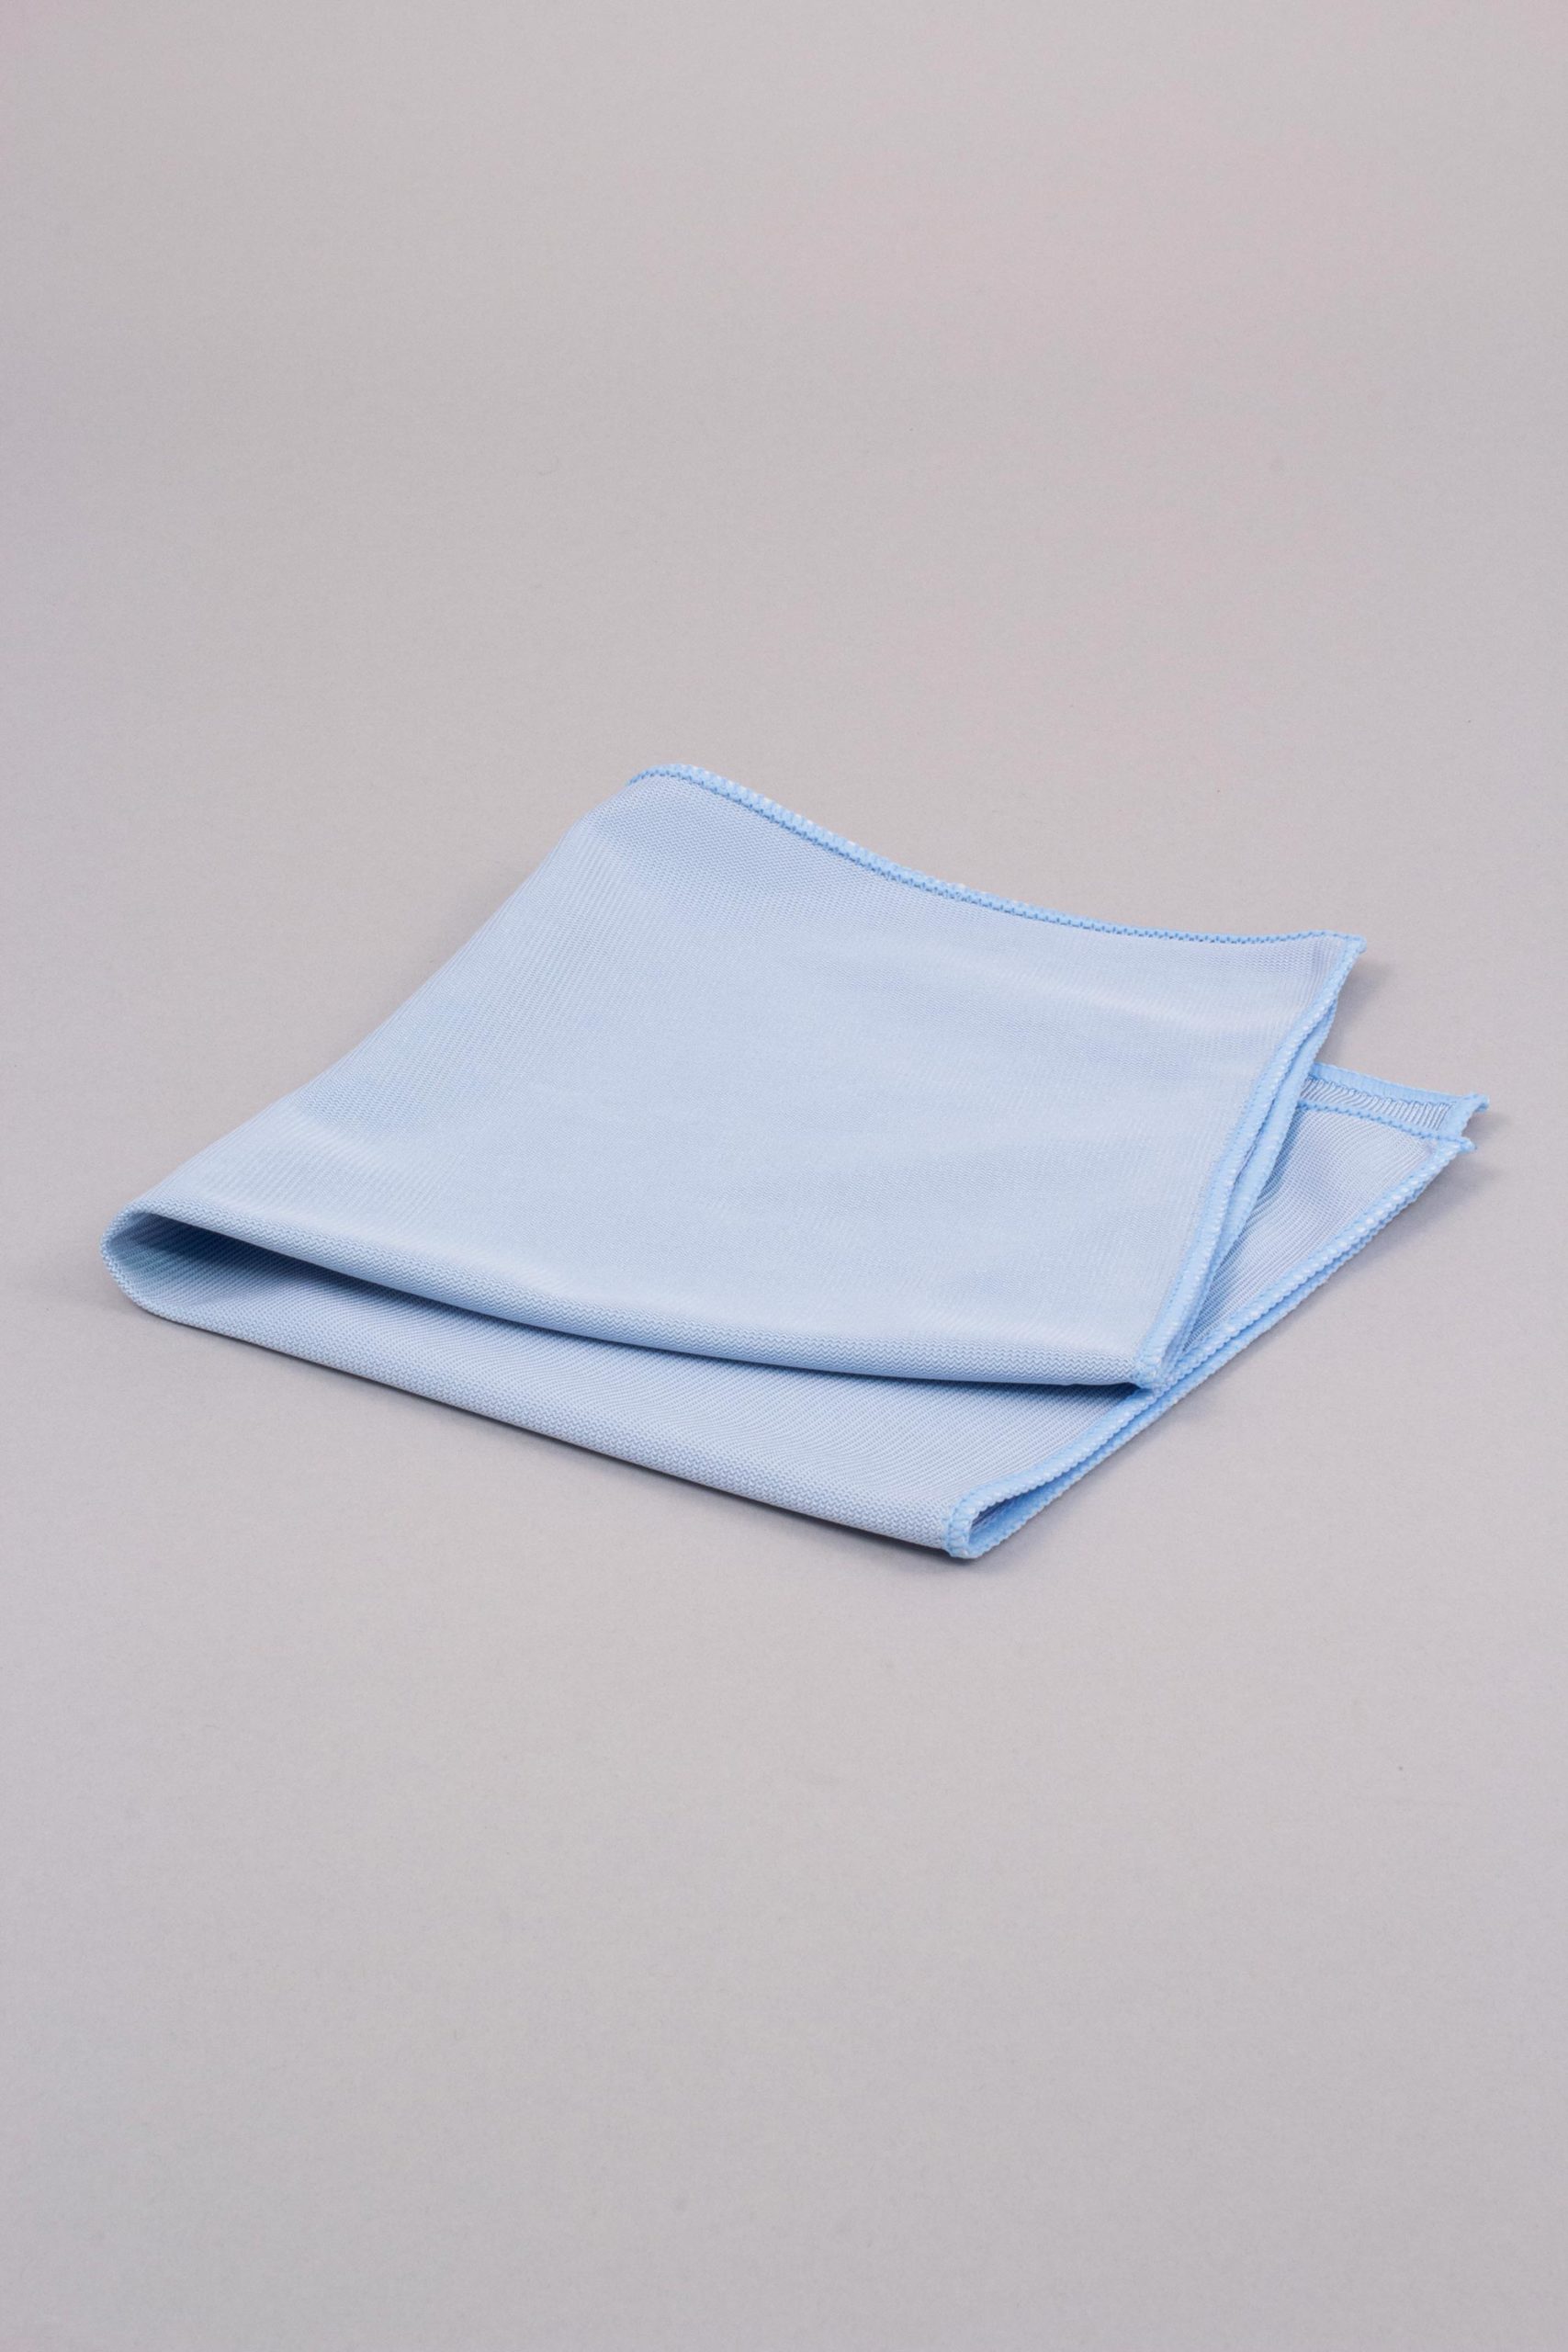 Blue Microfiber Glass Cleaning Cloths & Towels